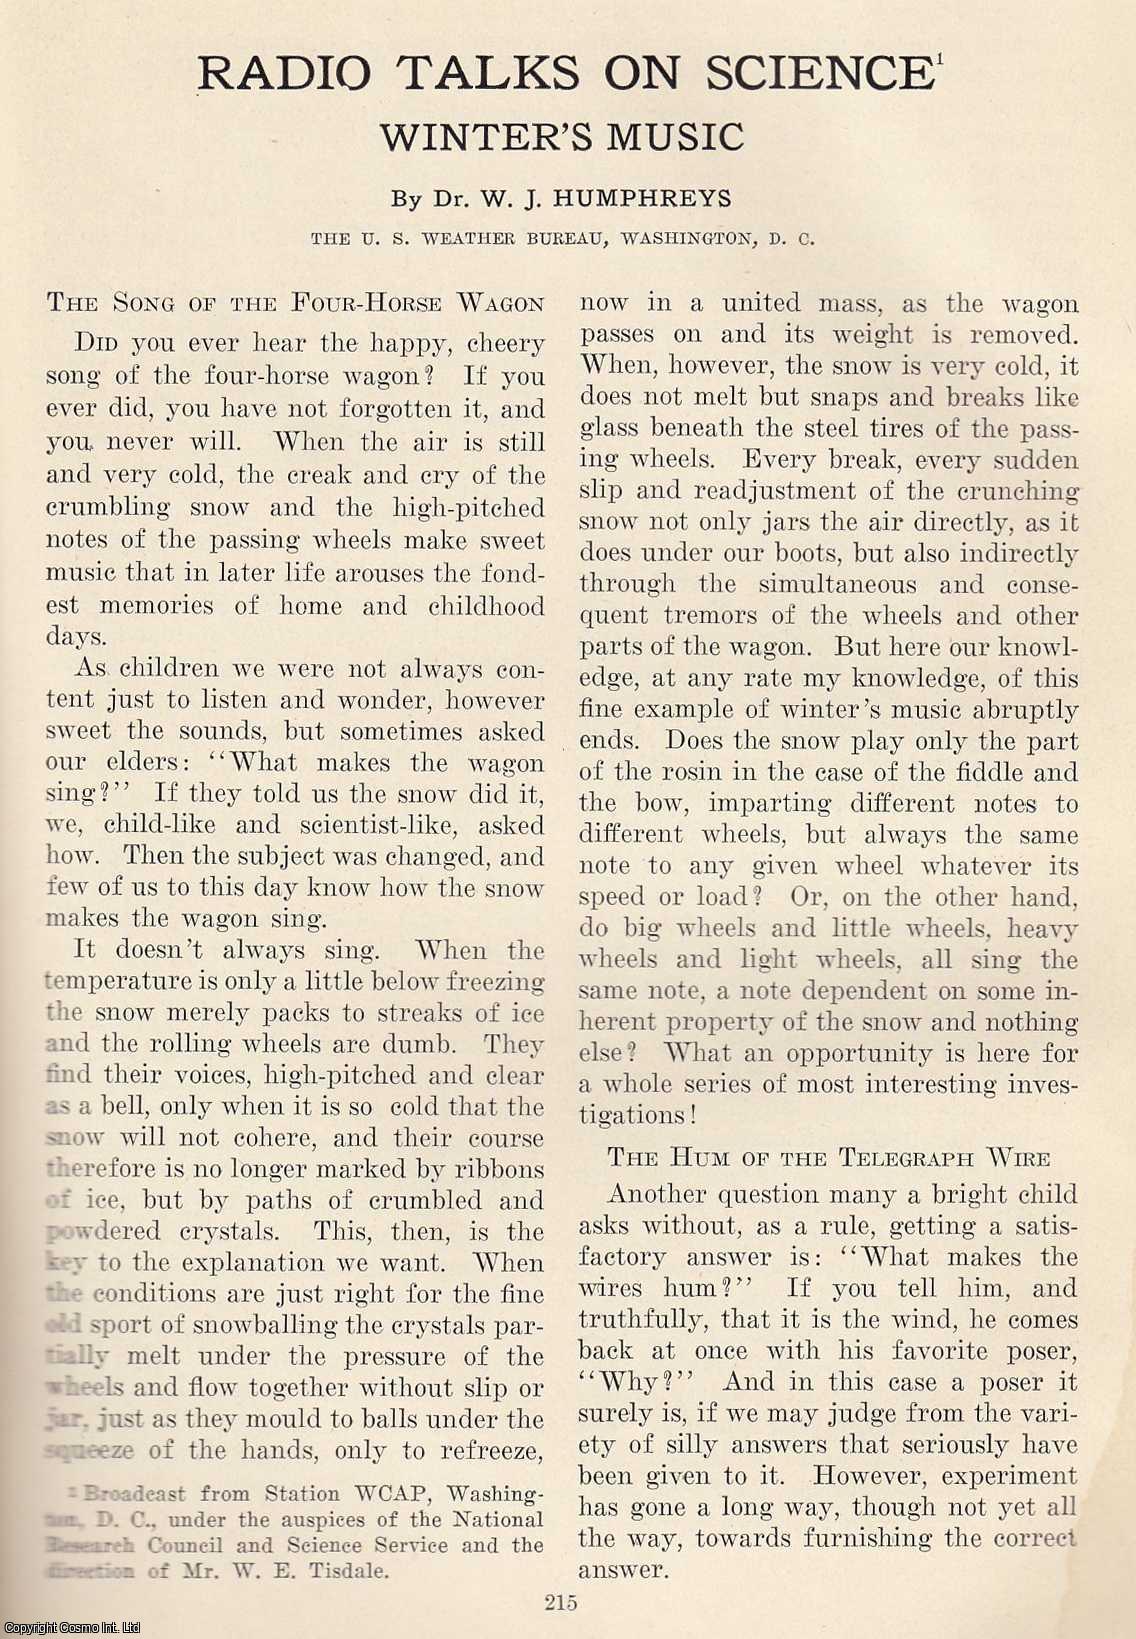 Dr. W. J. Humphreys - Winter's Music. An original article from The Scientific Monthly, 1926.